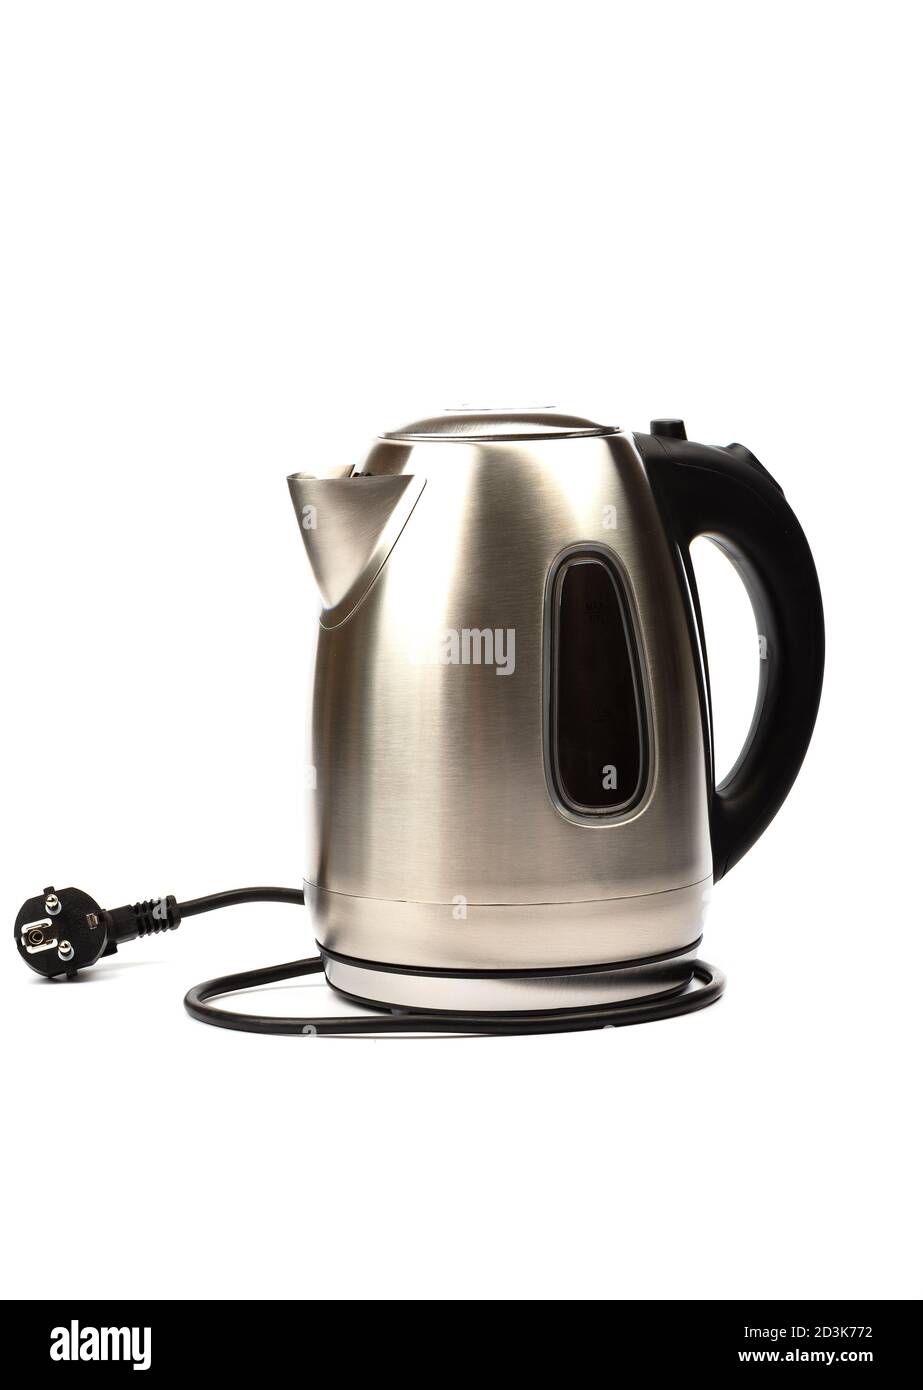 https://c8.alamy.com/comp/2D3K772/electric-kettle-with-stand-isolated-on-white-background-electric-cord-with-plug-2D3K772.jpg